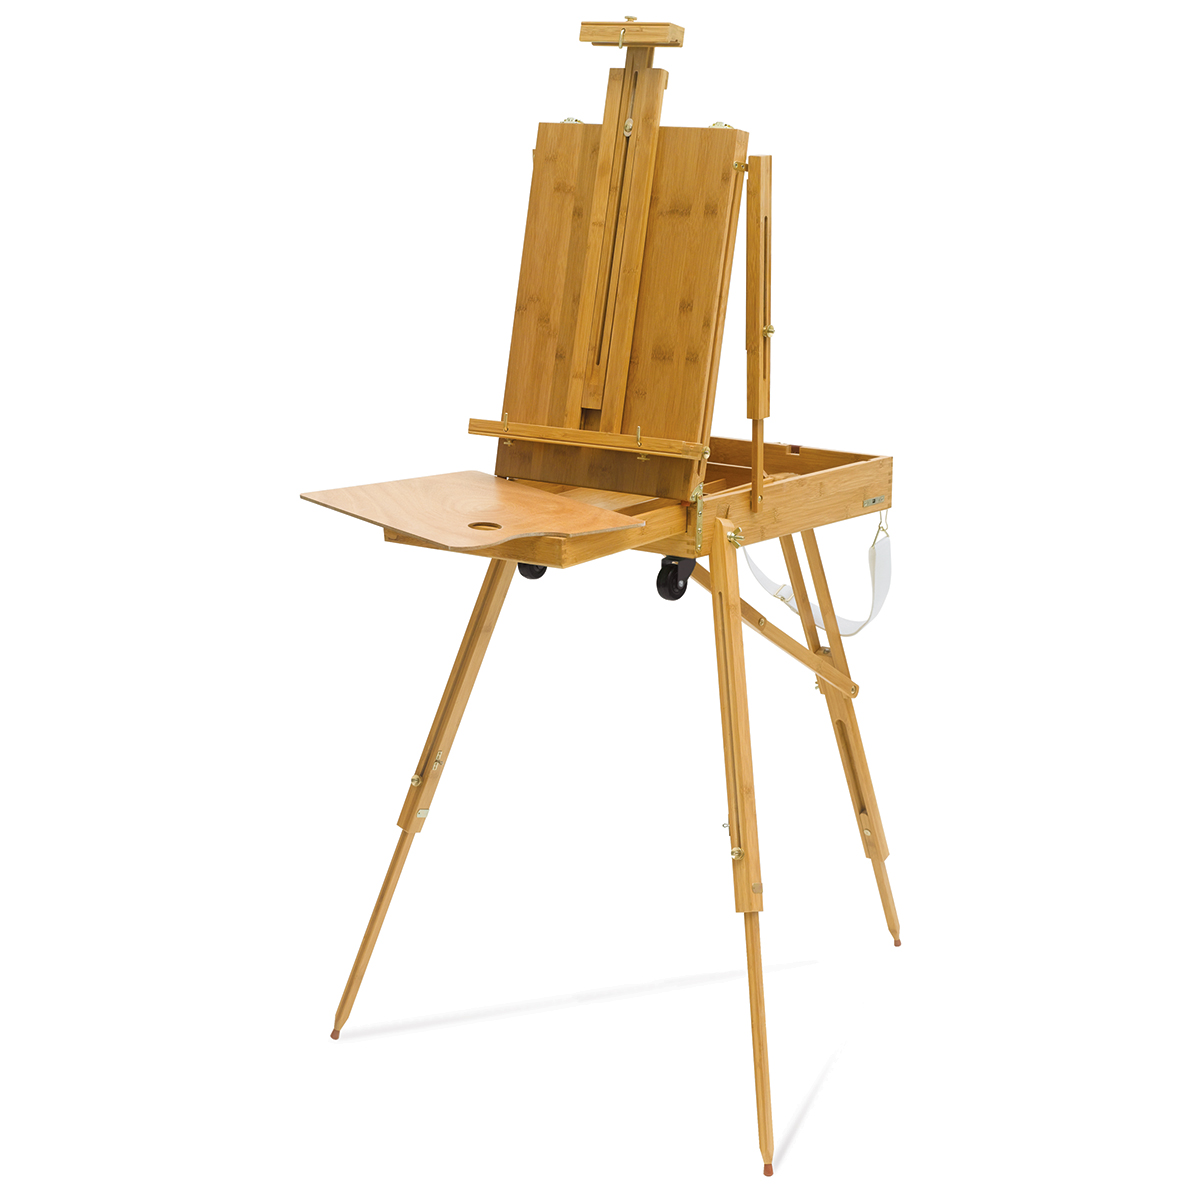 Convenient Drawing French Easel Box - China Easel with Stool, Teaching  Easel